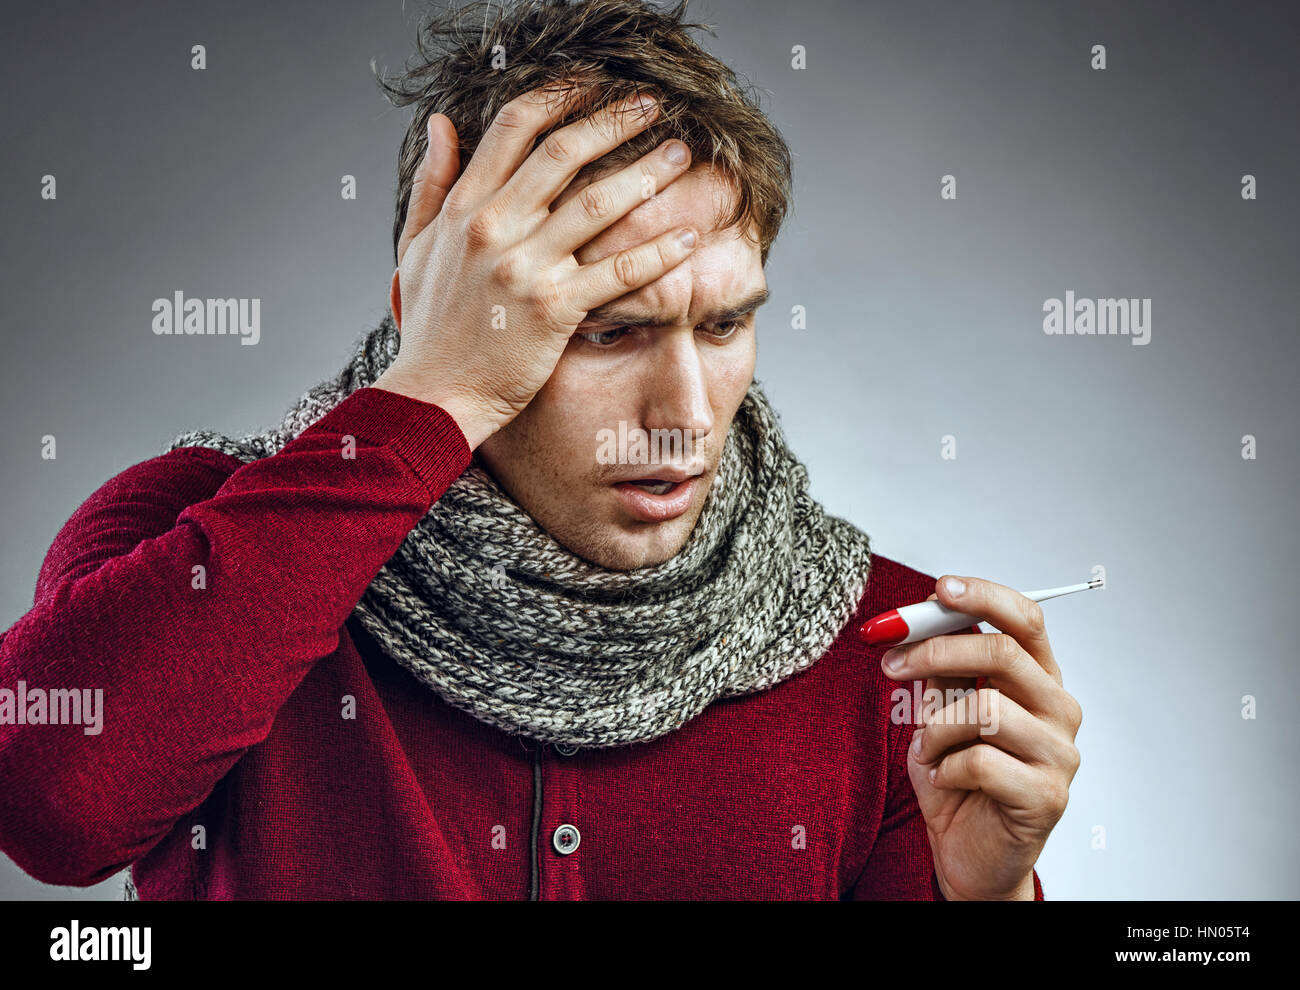 Attractive man reading his temperature on a thermometer. Ill man suffering cold and winter flu virus. Health care concept Stock Photo